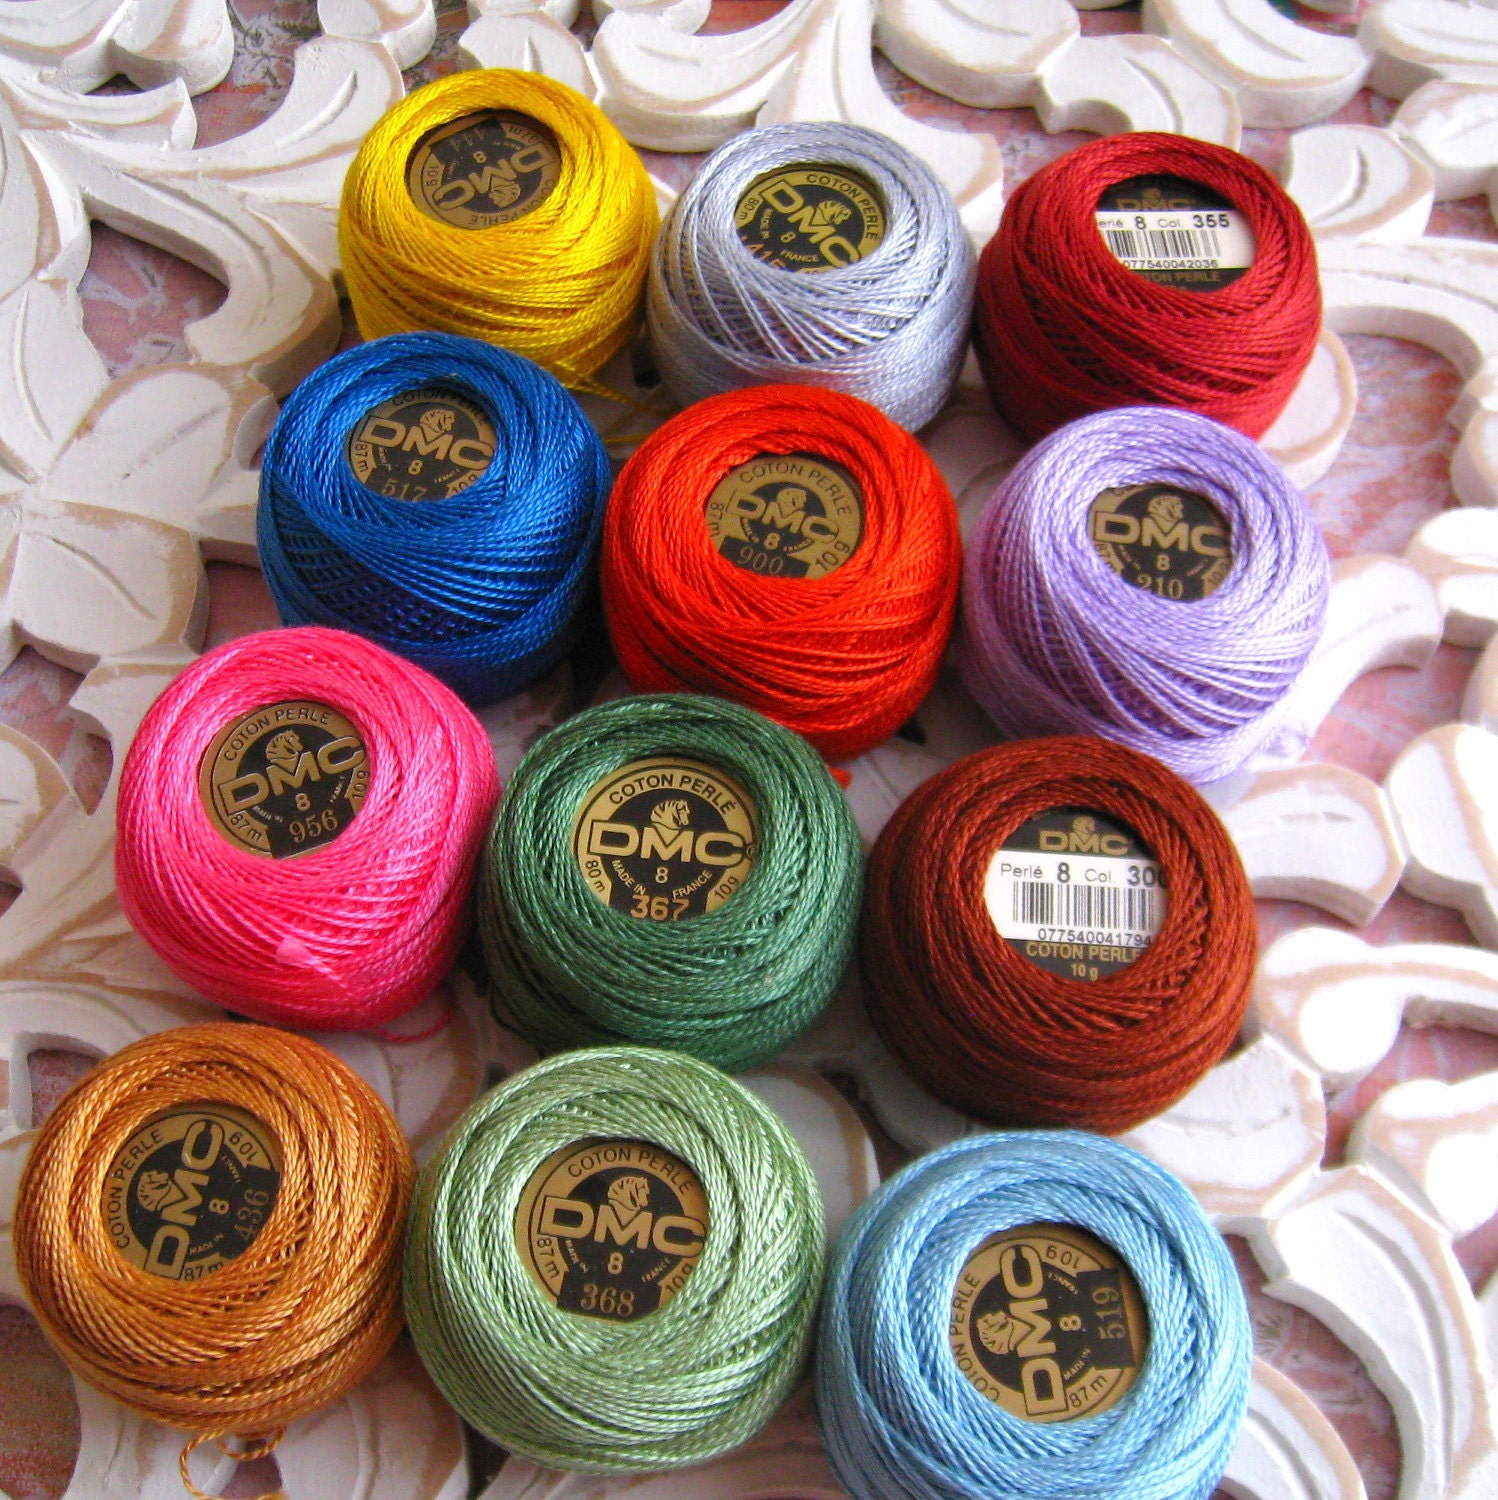 1 Dozen DMC Perle Threads - You CHOOSE the Color - Only SOLID Colors - Perle Cotton Thread Size 8 - for needlecraft, scrabooking - NAKPUNAR